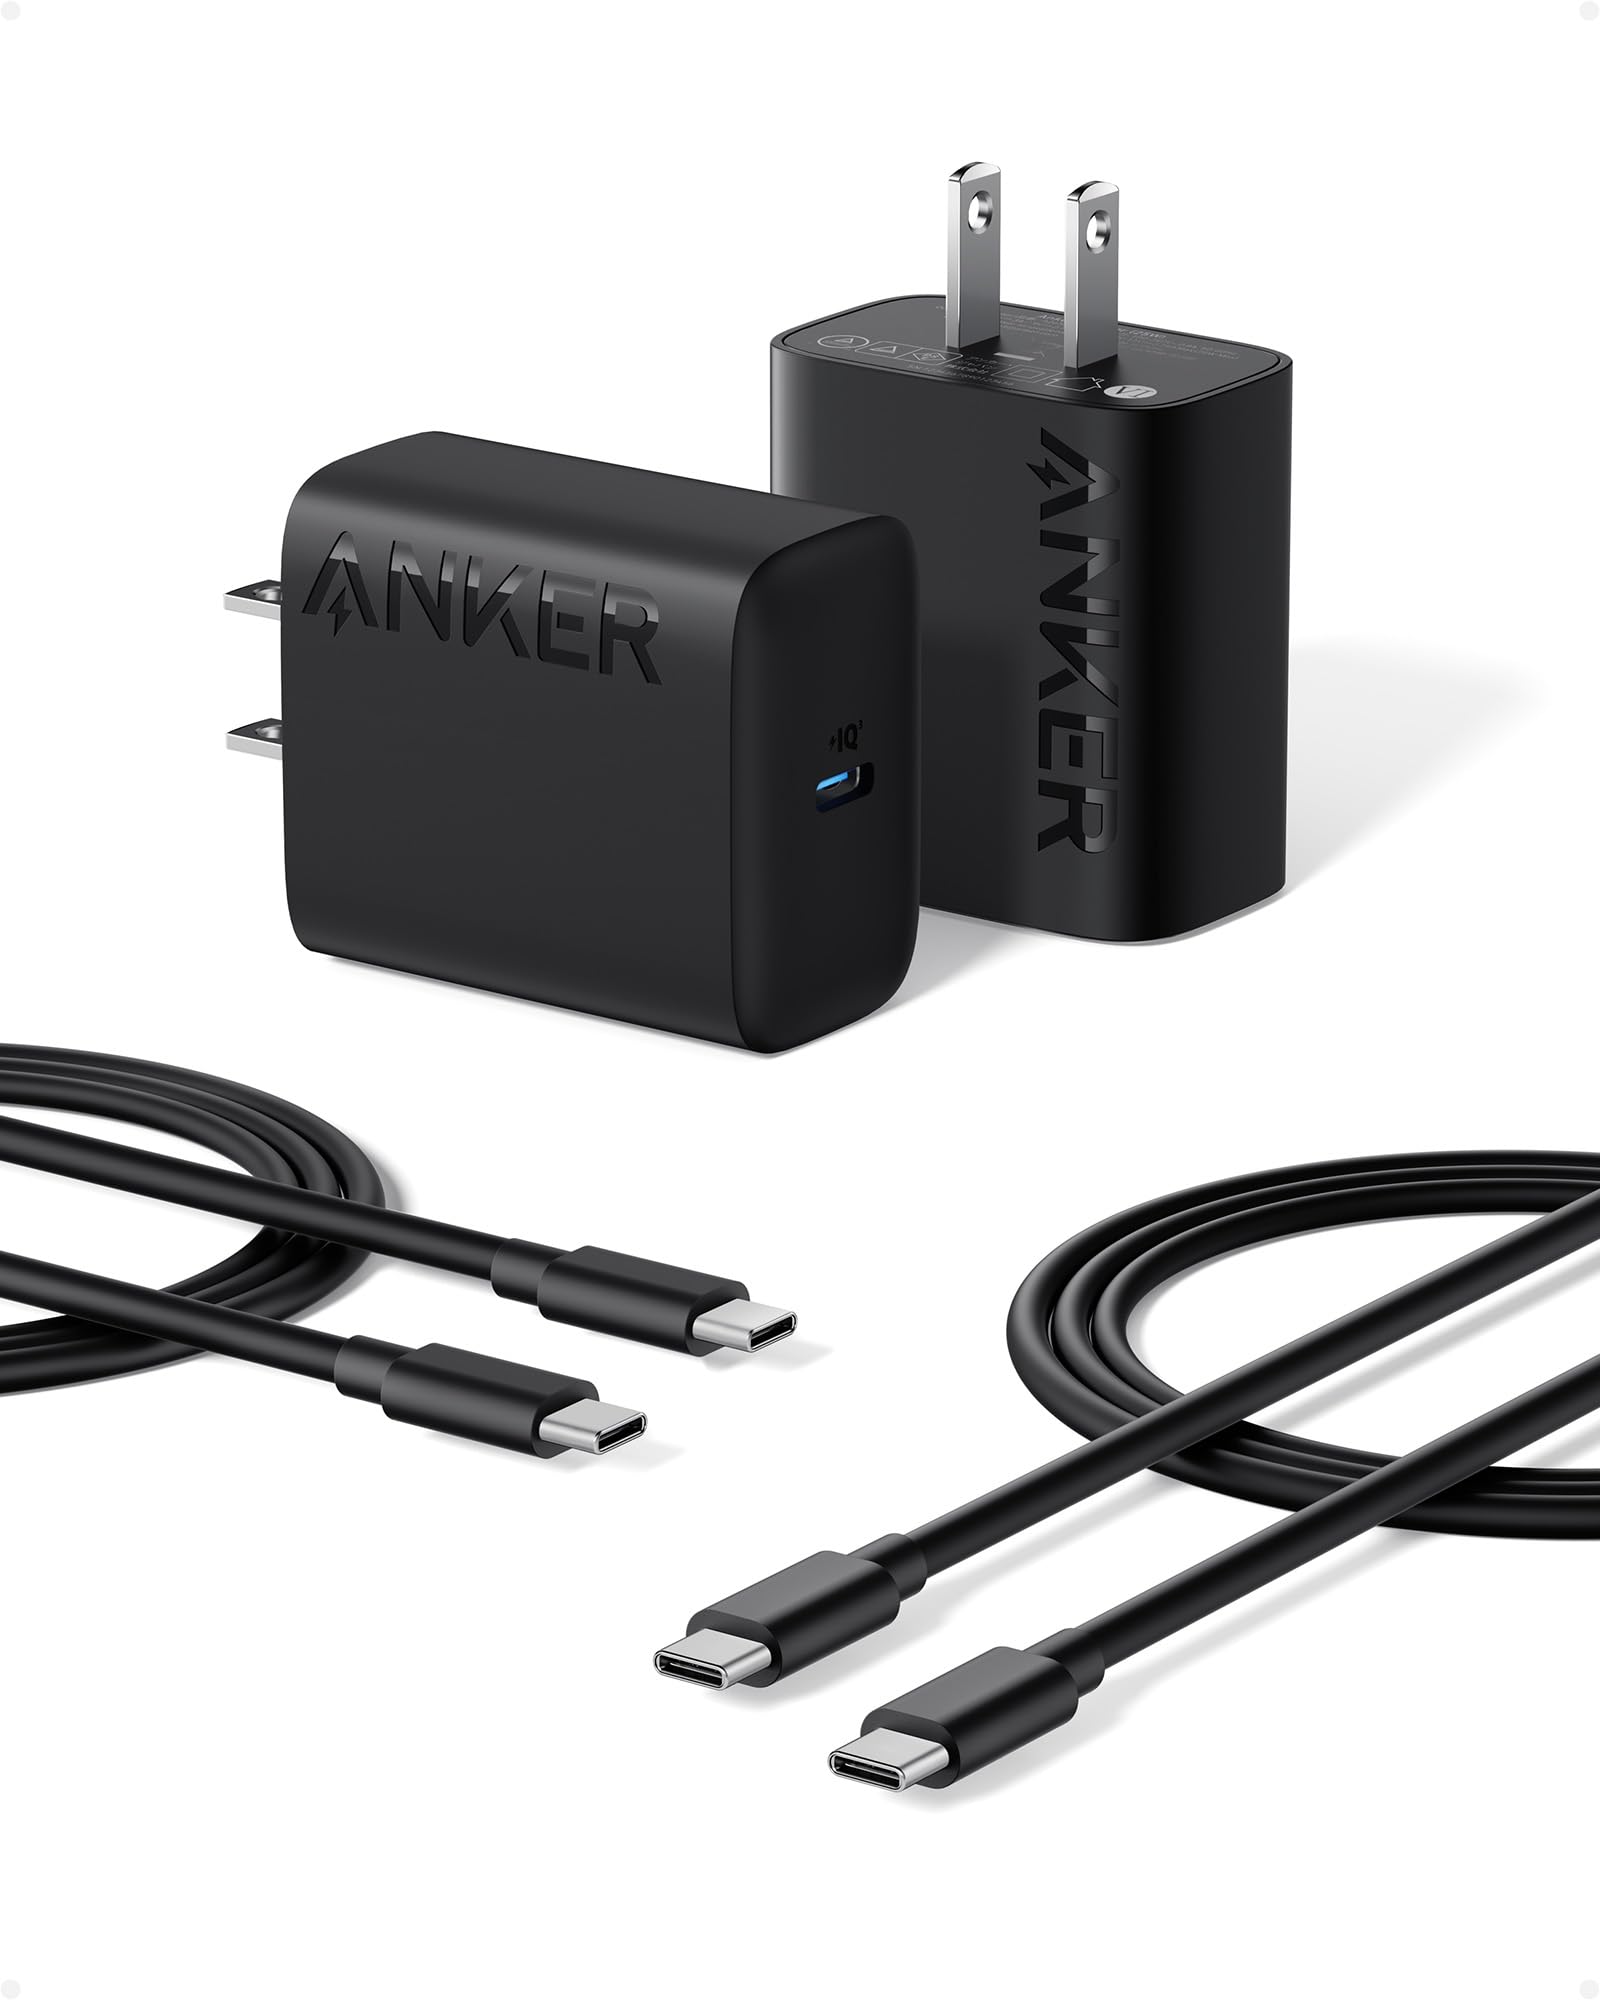 Anker 2-Pack 25W USB-C Super Fast PPS Charger w/ 2x 5' USB-C Cable $16 + Free Shipping w/ Prime or orders $35+